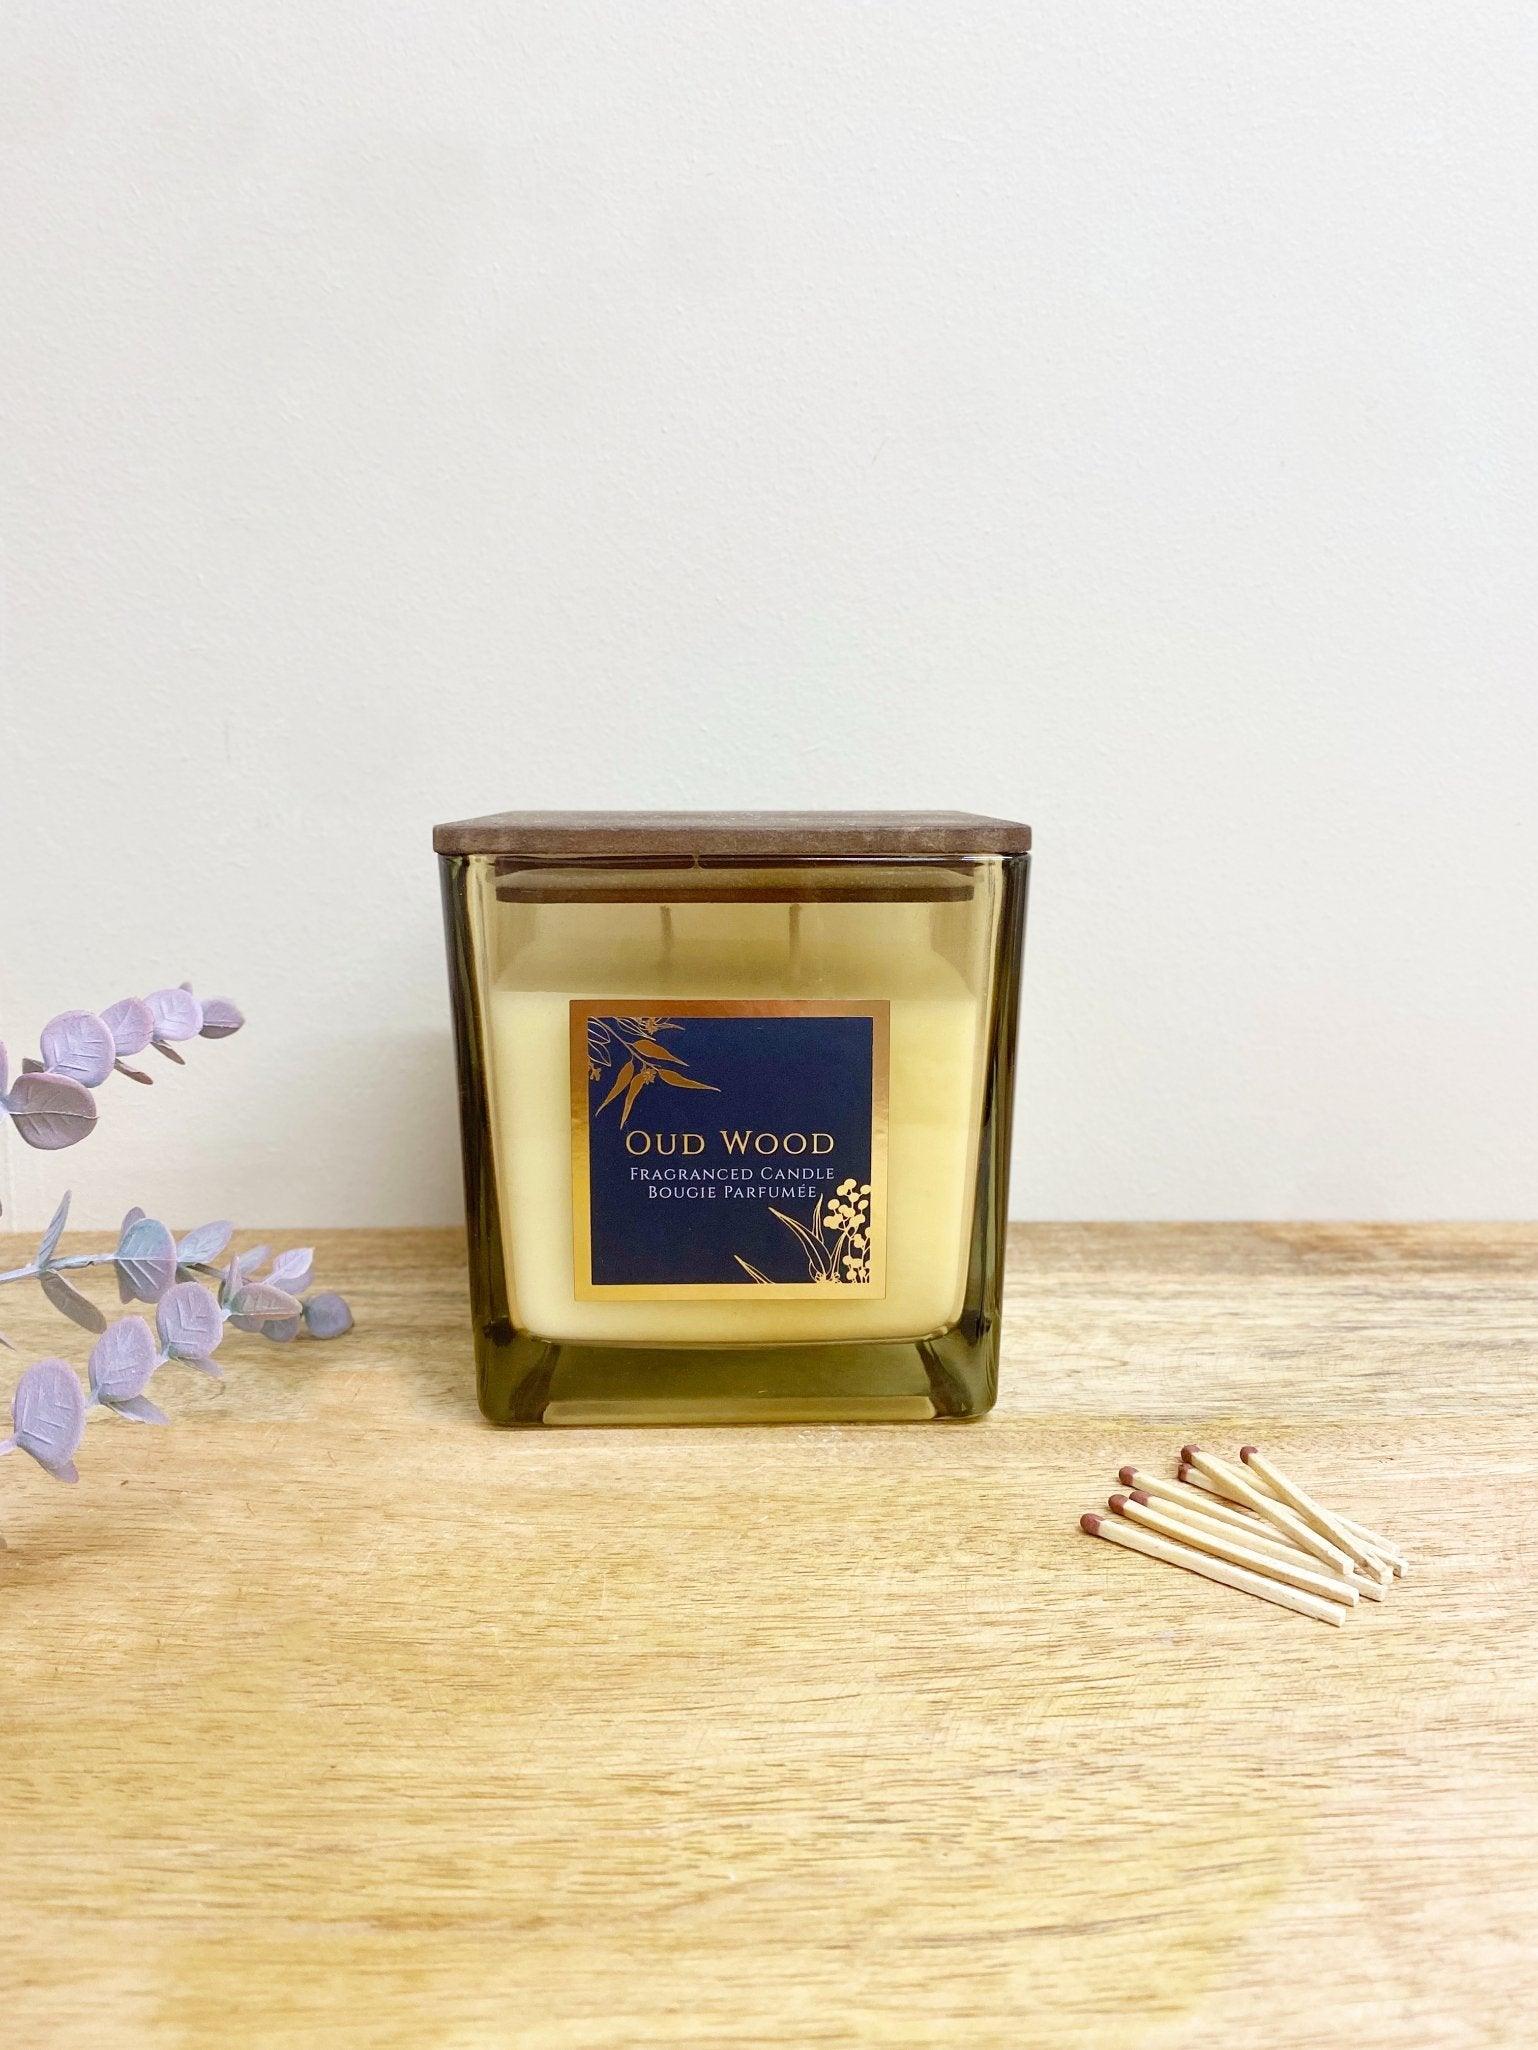 View Oud Wood Scented Candle With Wooden Lid information